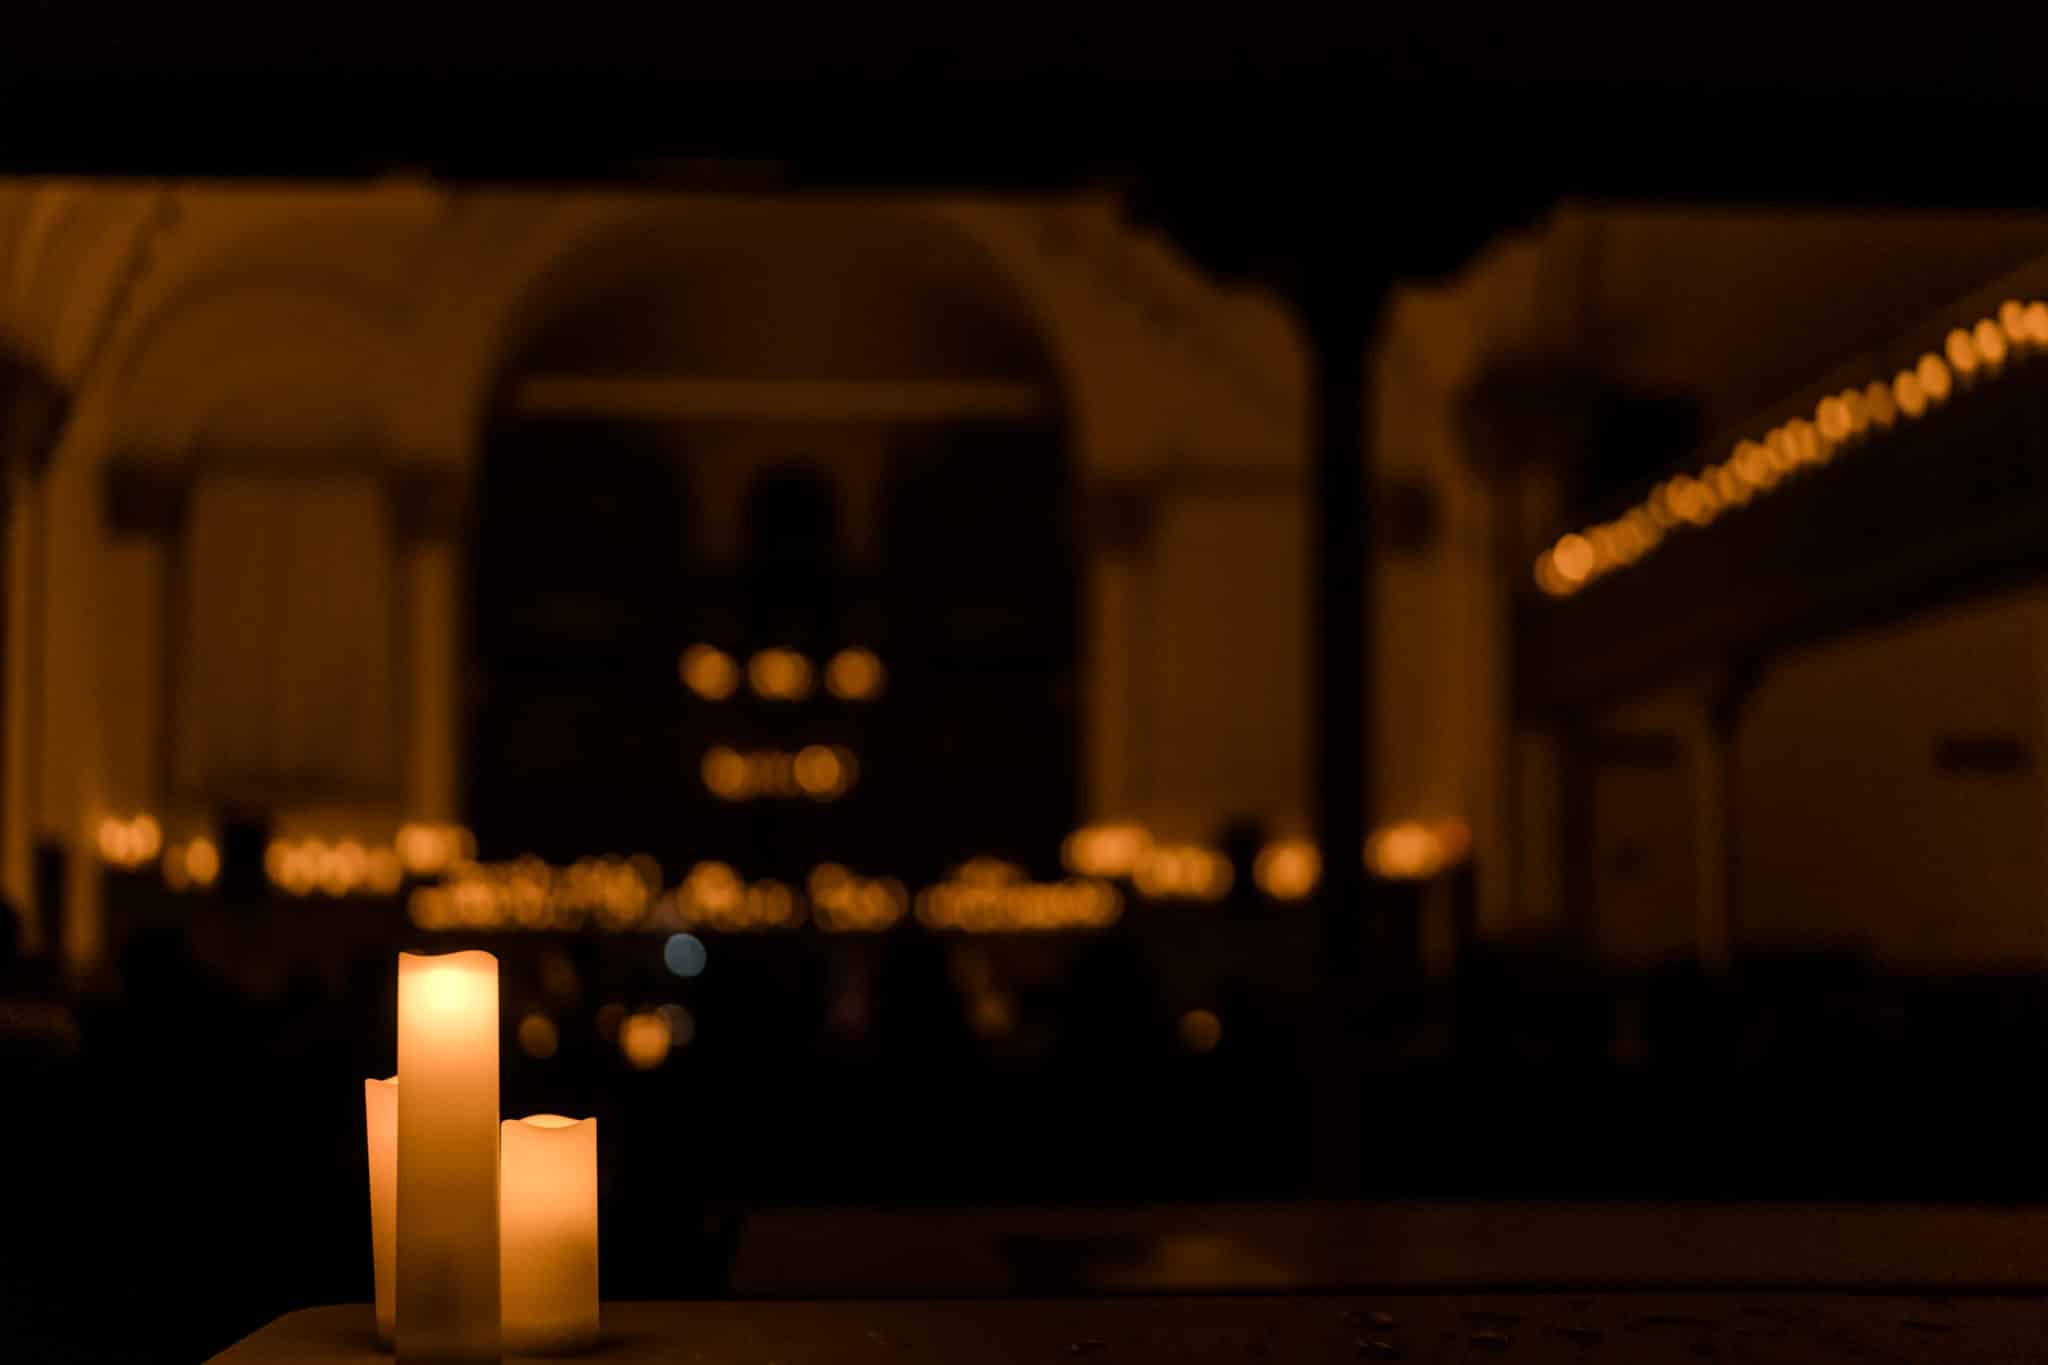 A close-up of three candles with a blurred background of a candlelit performance.